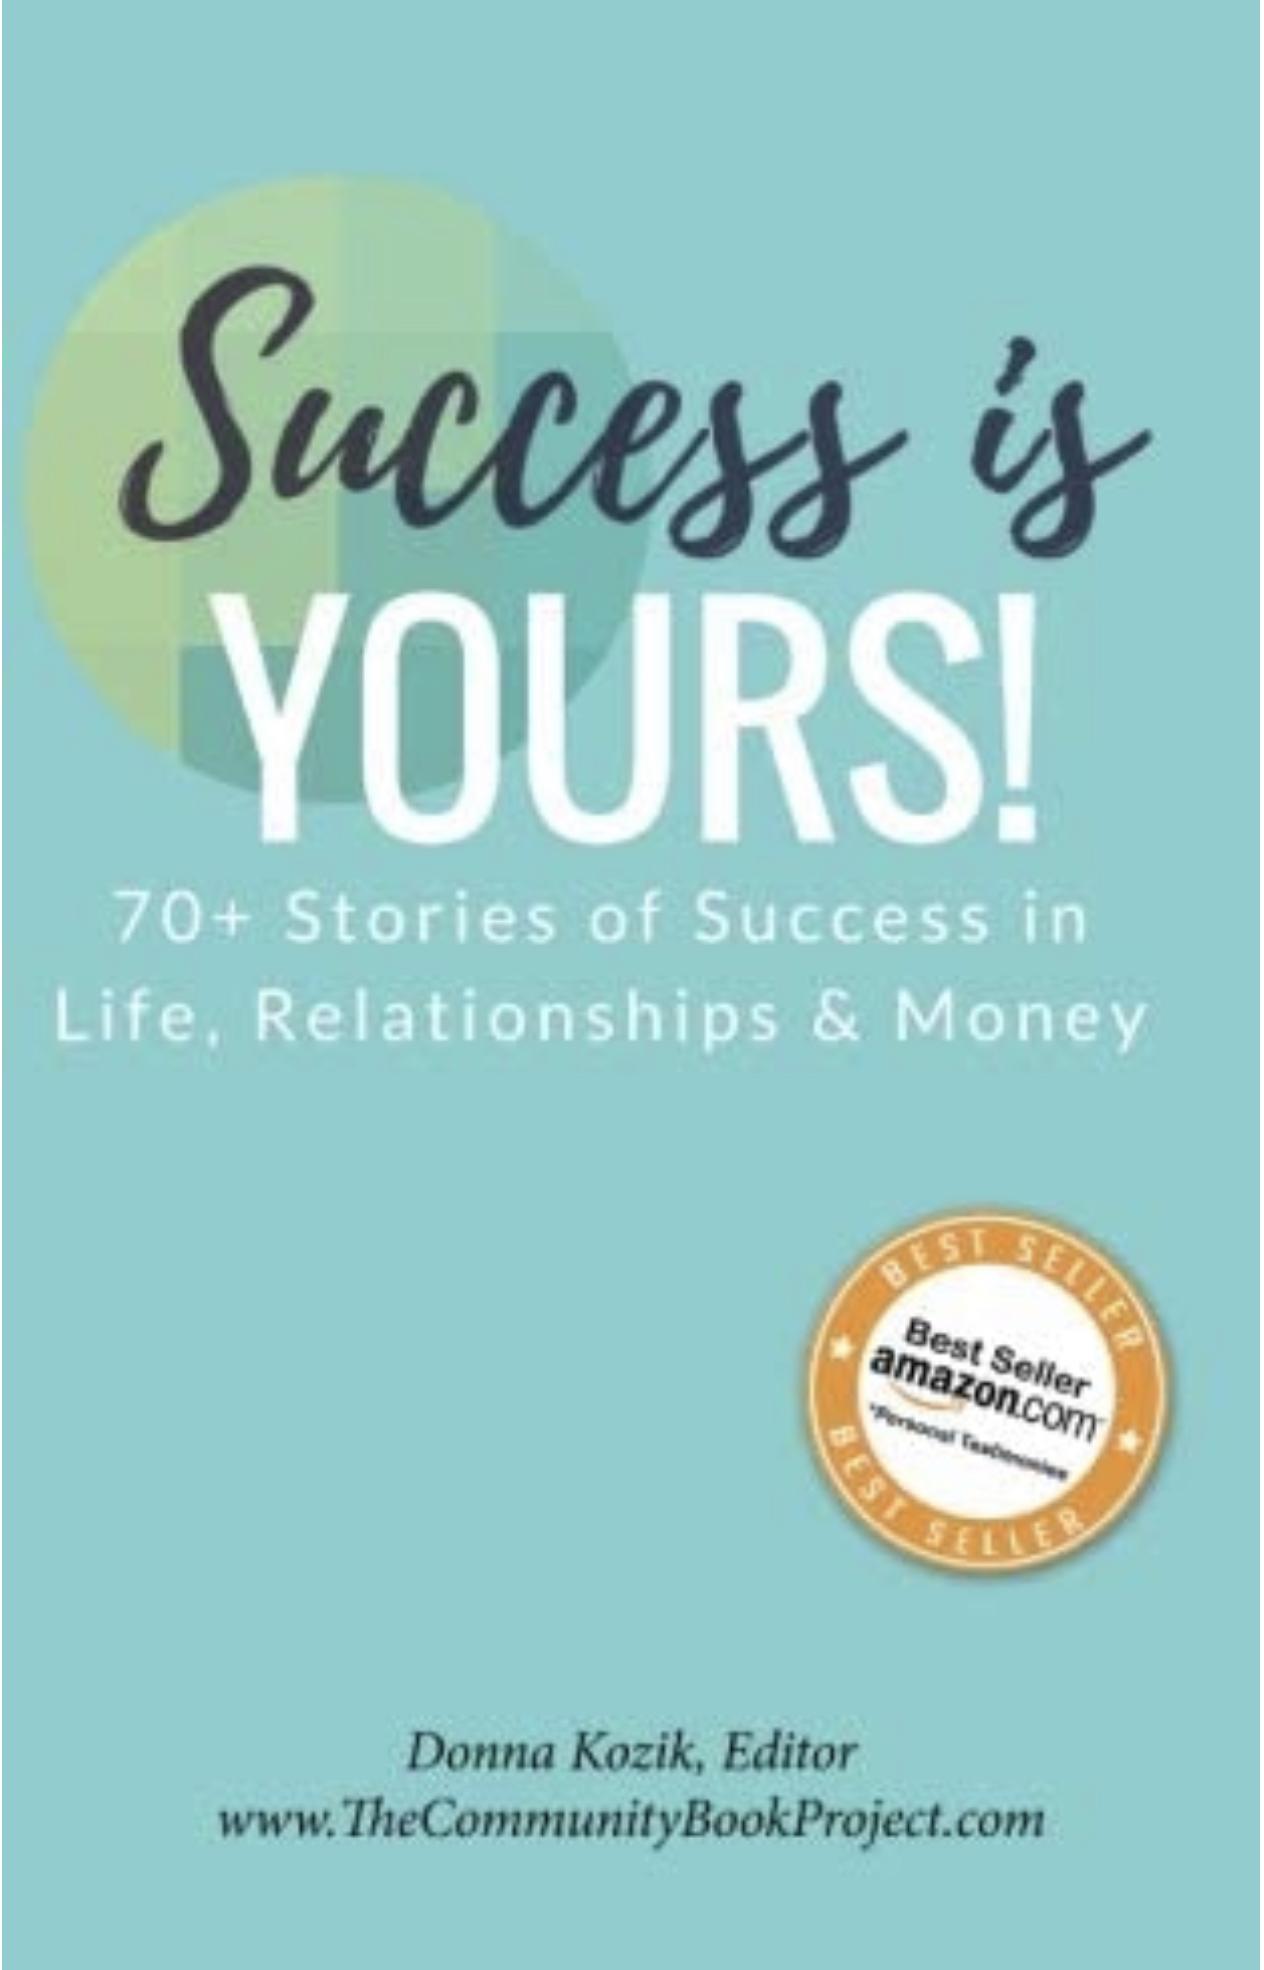 Success is Yours! book cover